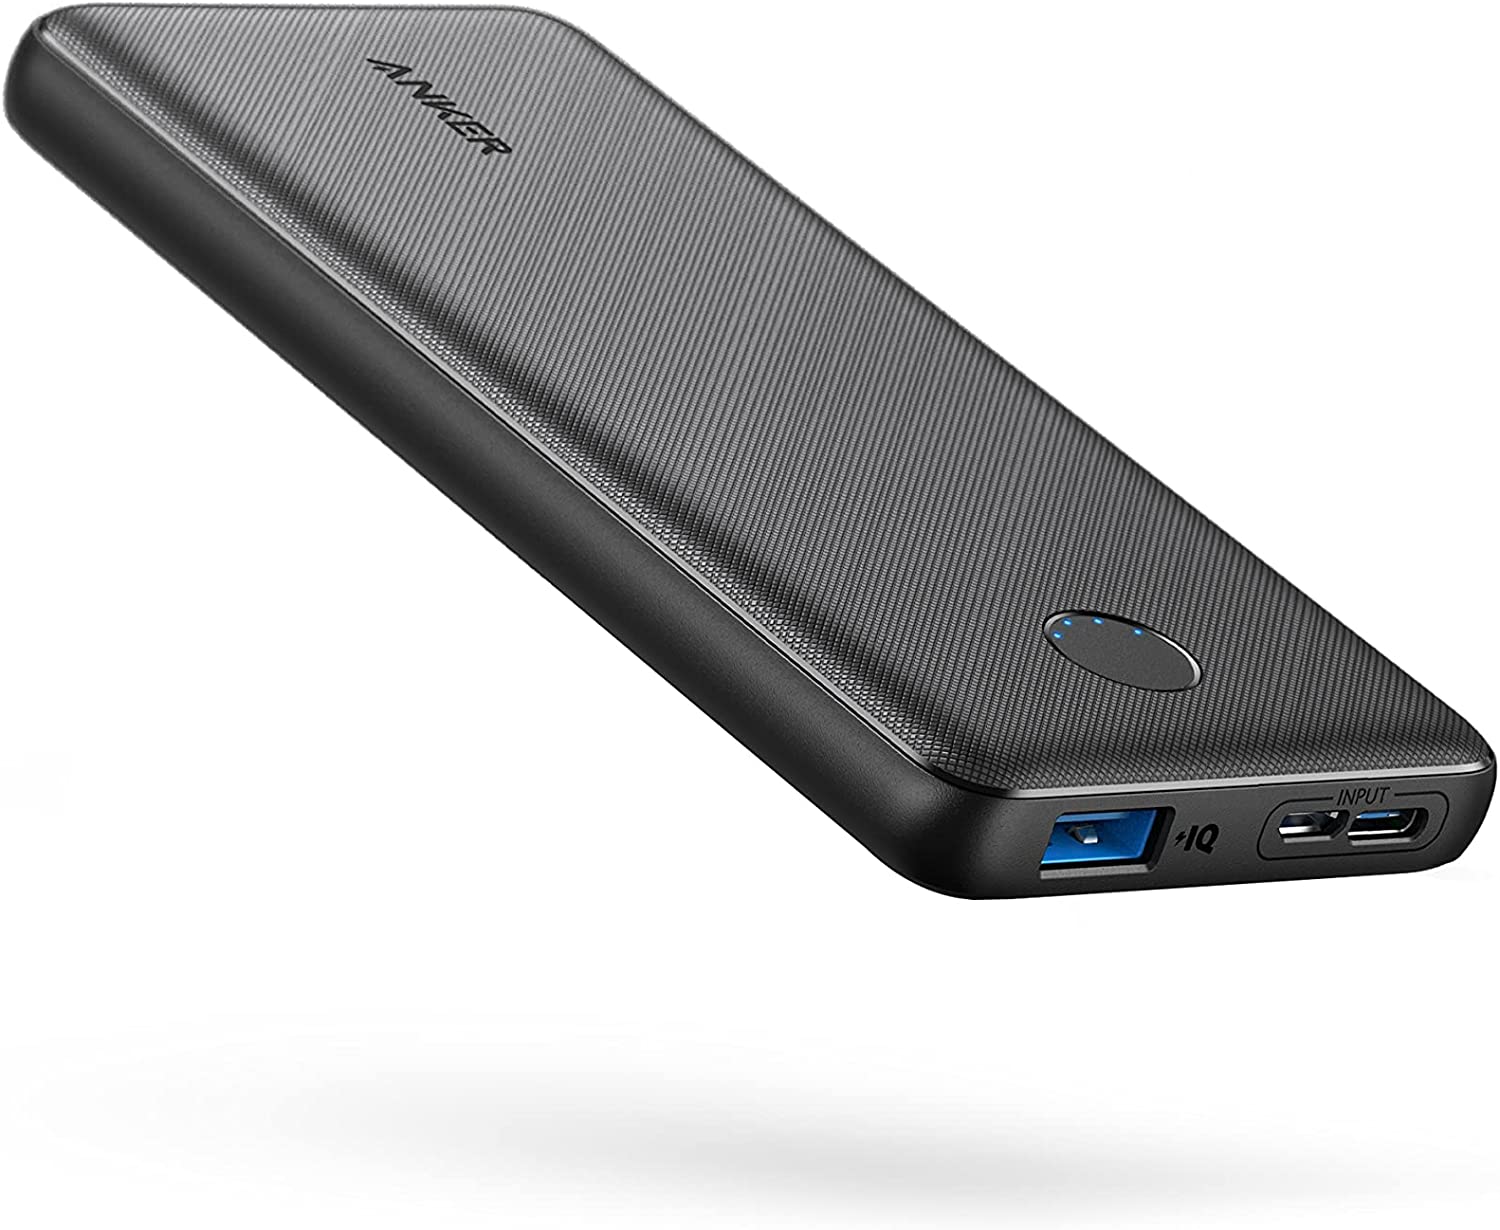 Anker PowerCore Slim 10000mAh Power Delivery Portable Charger $15.40 + Free Ship w/Prime